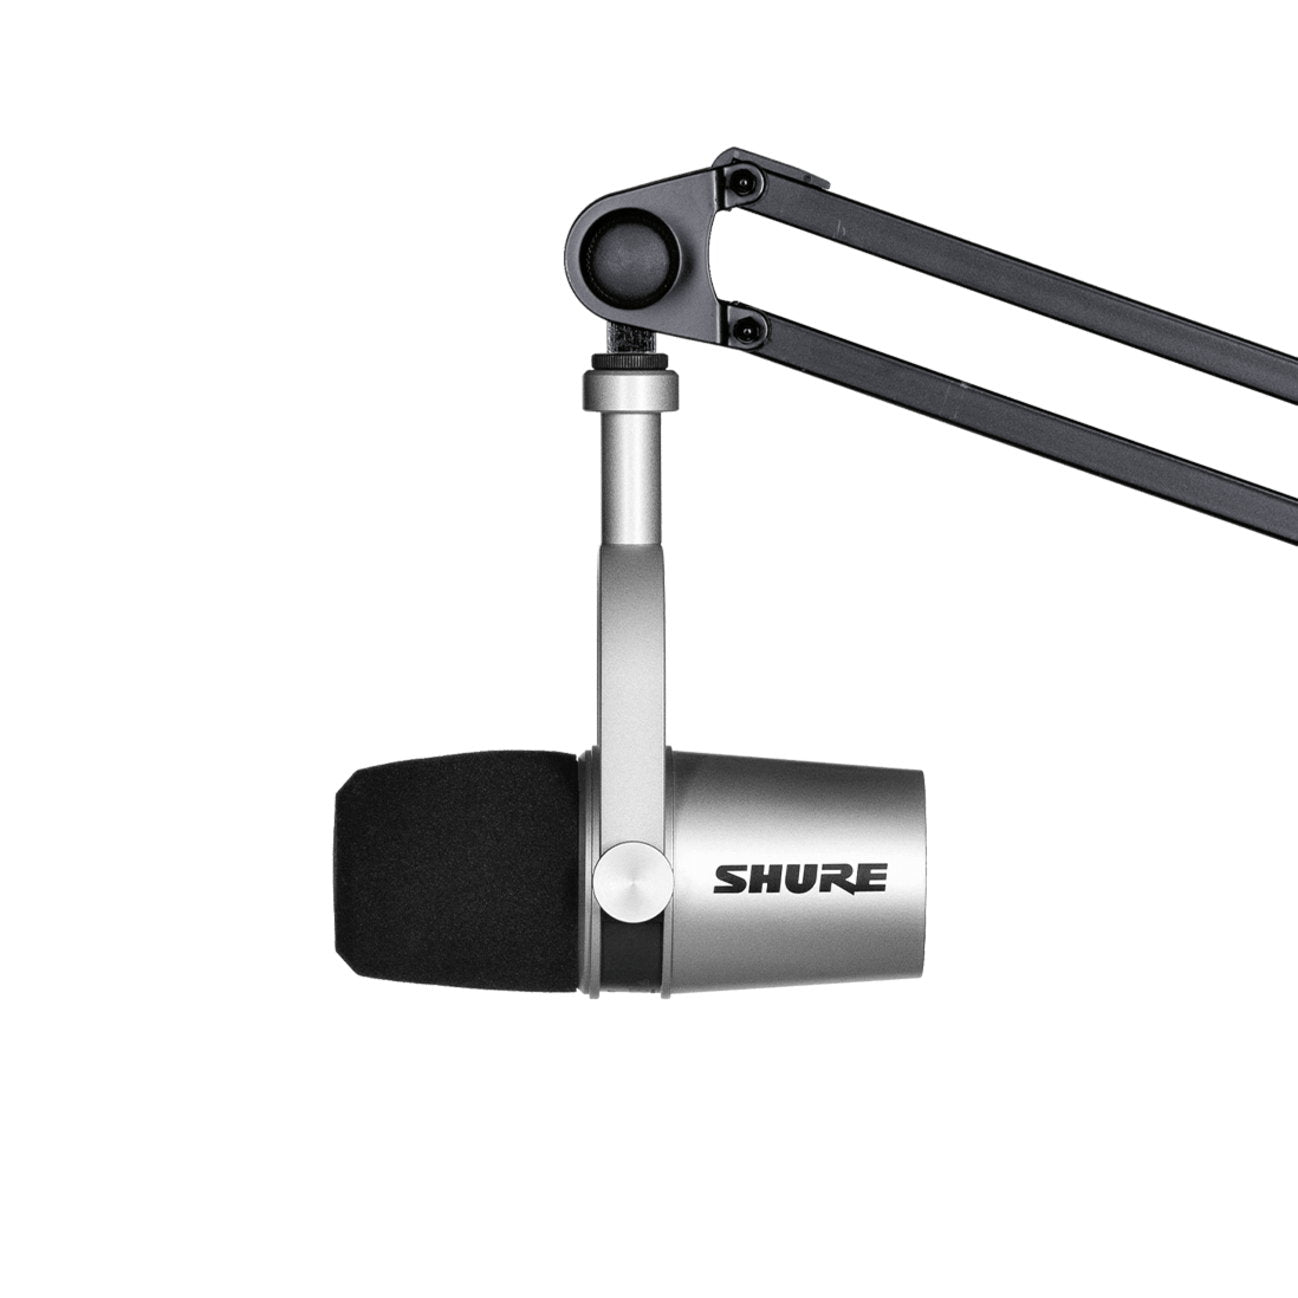 Shure MV7 Podcast Microphone, Silver – Same Day Music